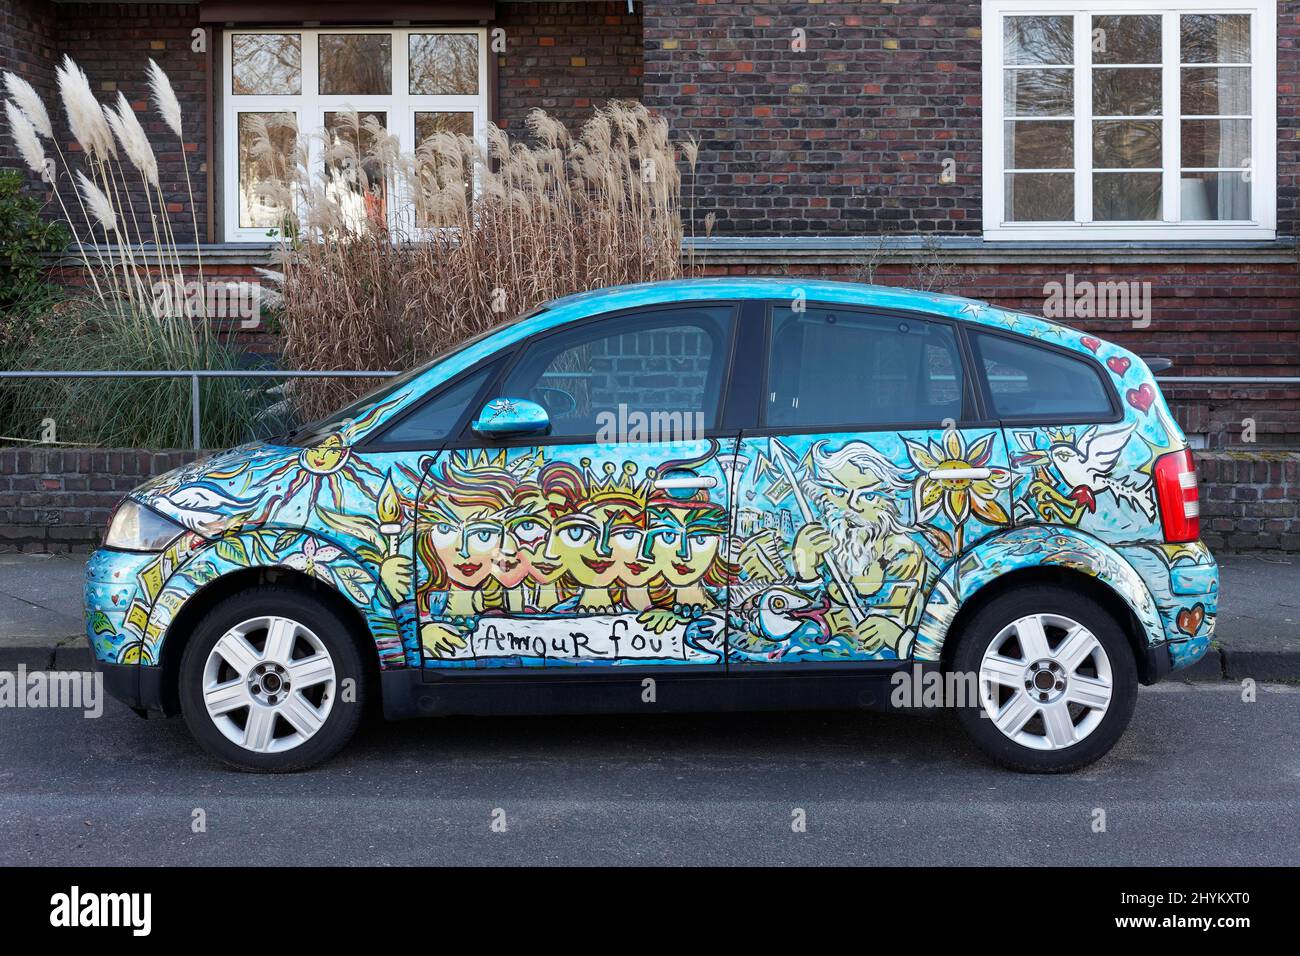 Artistically painted Audi A2 parked in front of residential building, motto Amour fou, crazy love, Duesseldorf, North Rhine-Westphalia, Germany Stock Photo